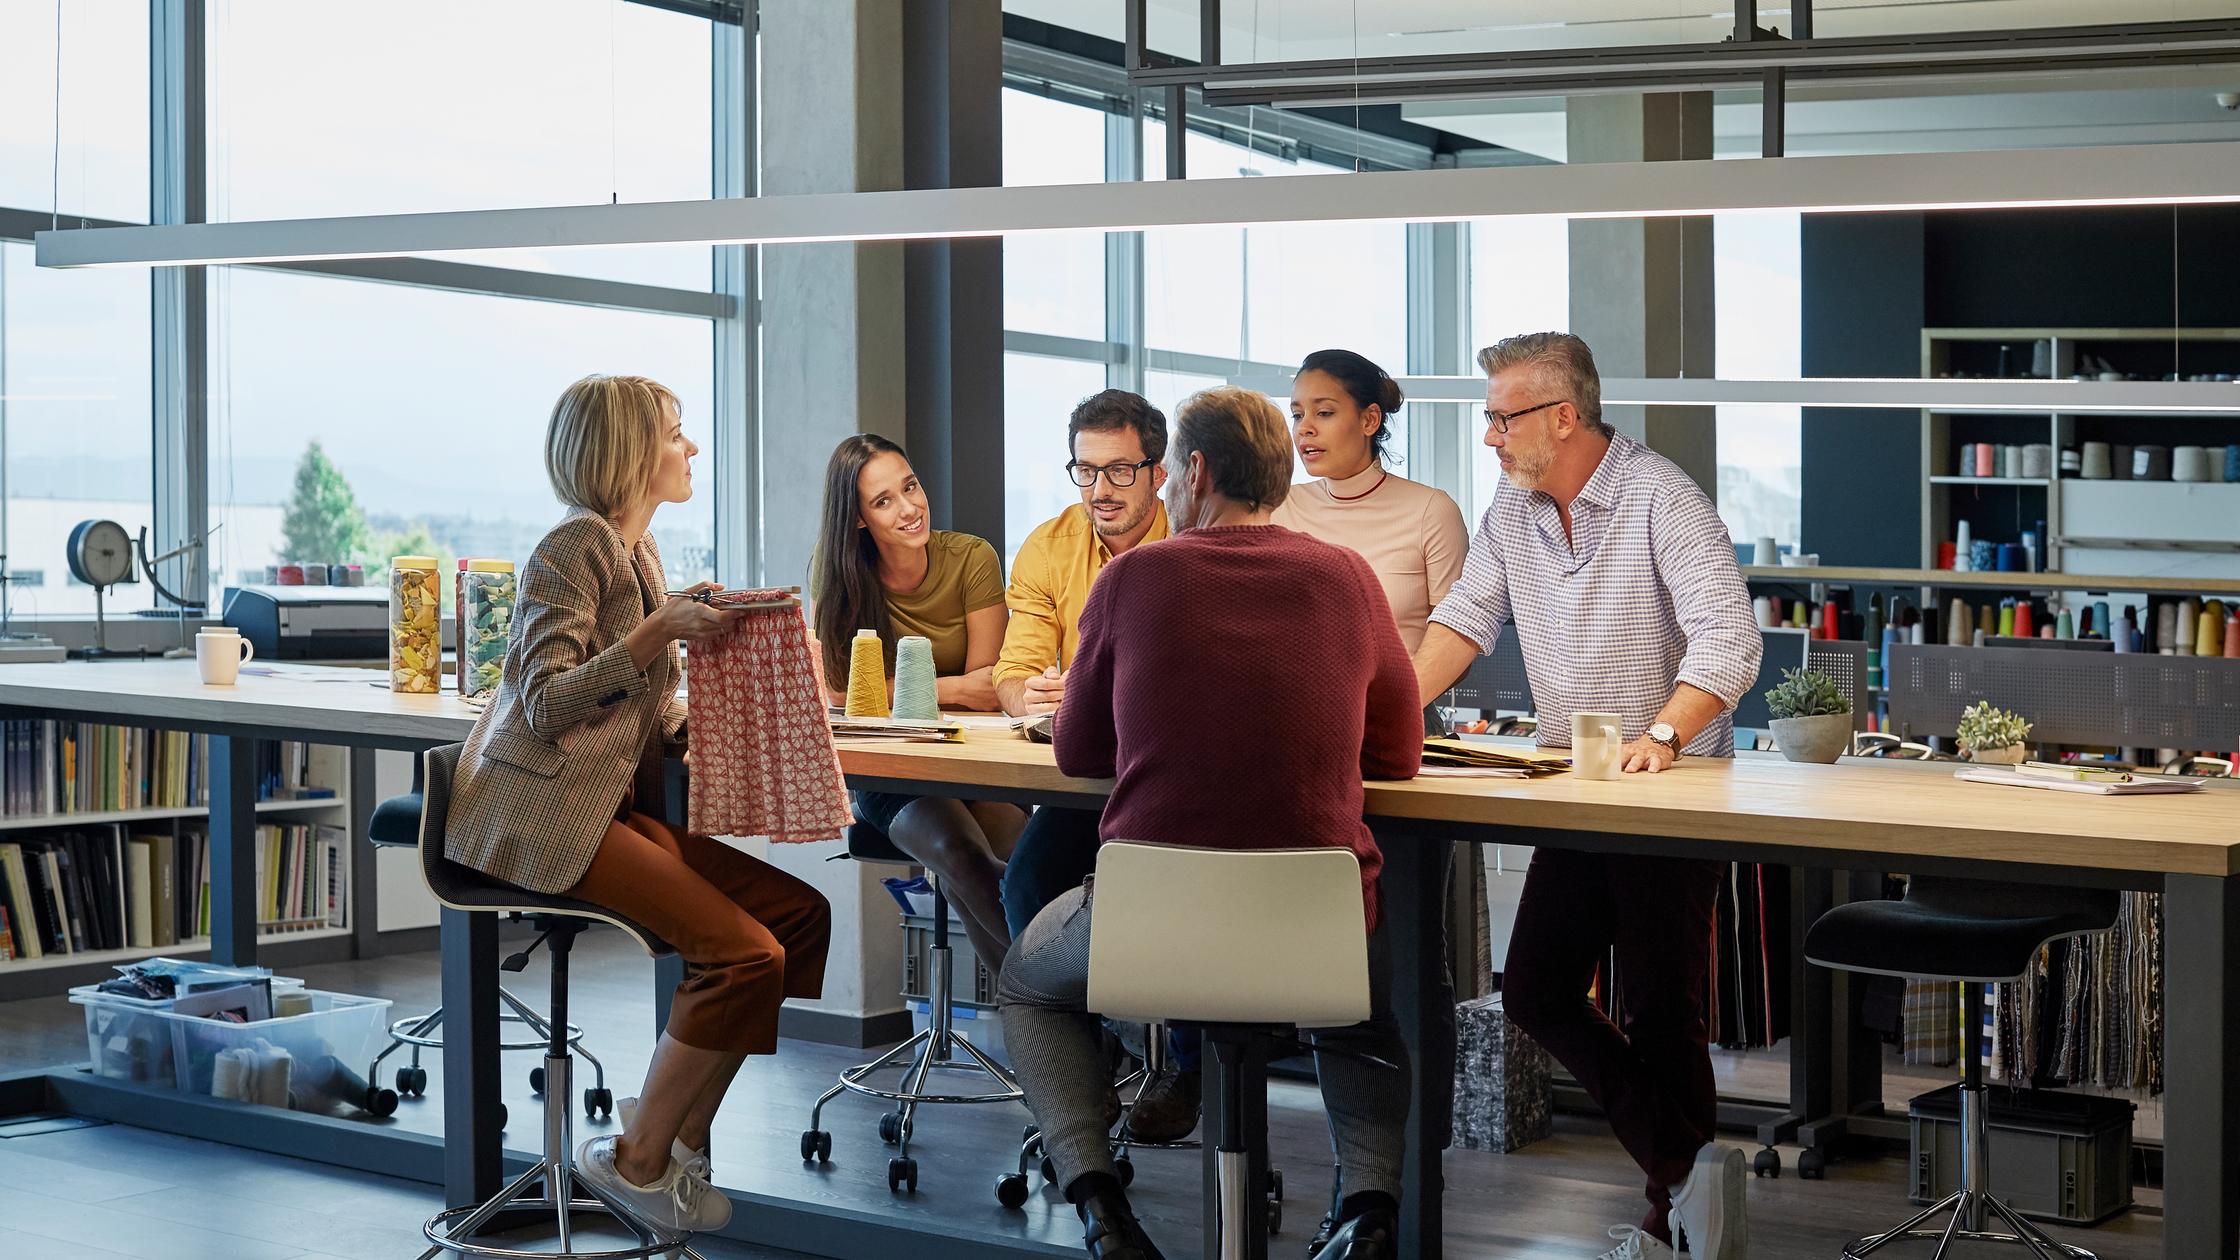 Business people discussing over fabric at conference table